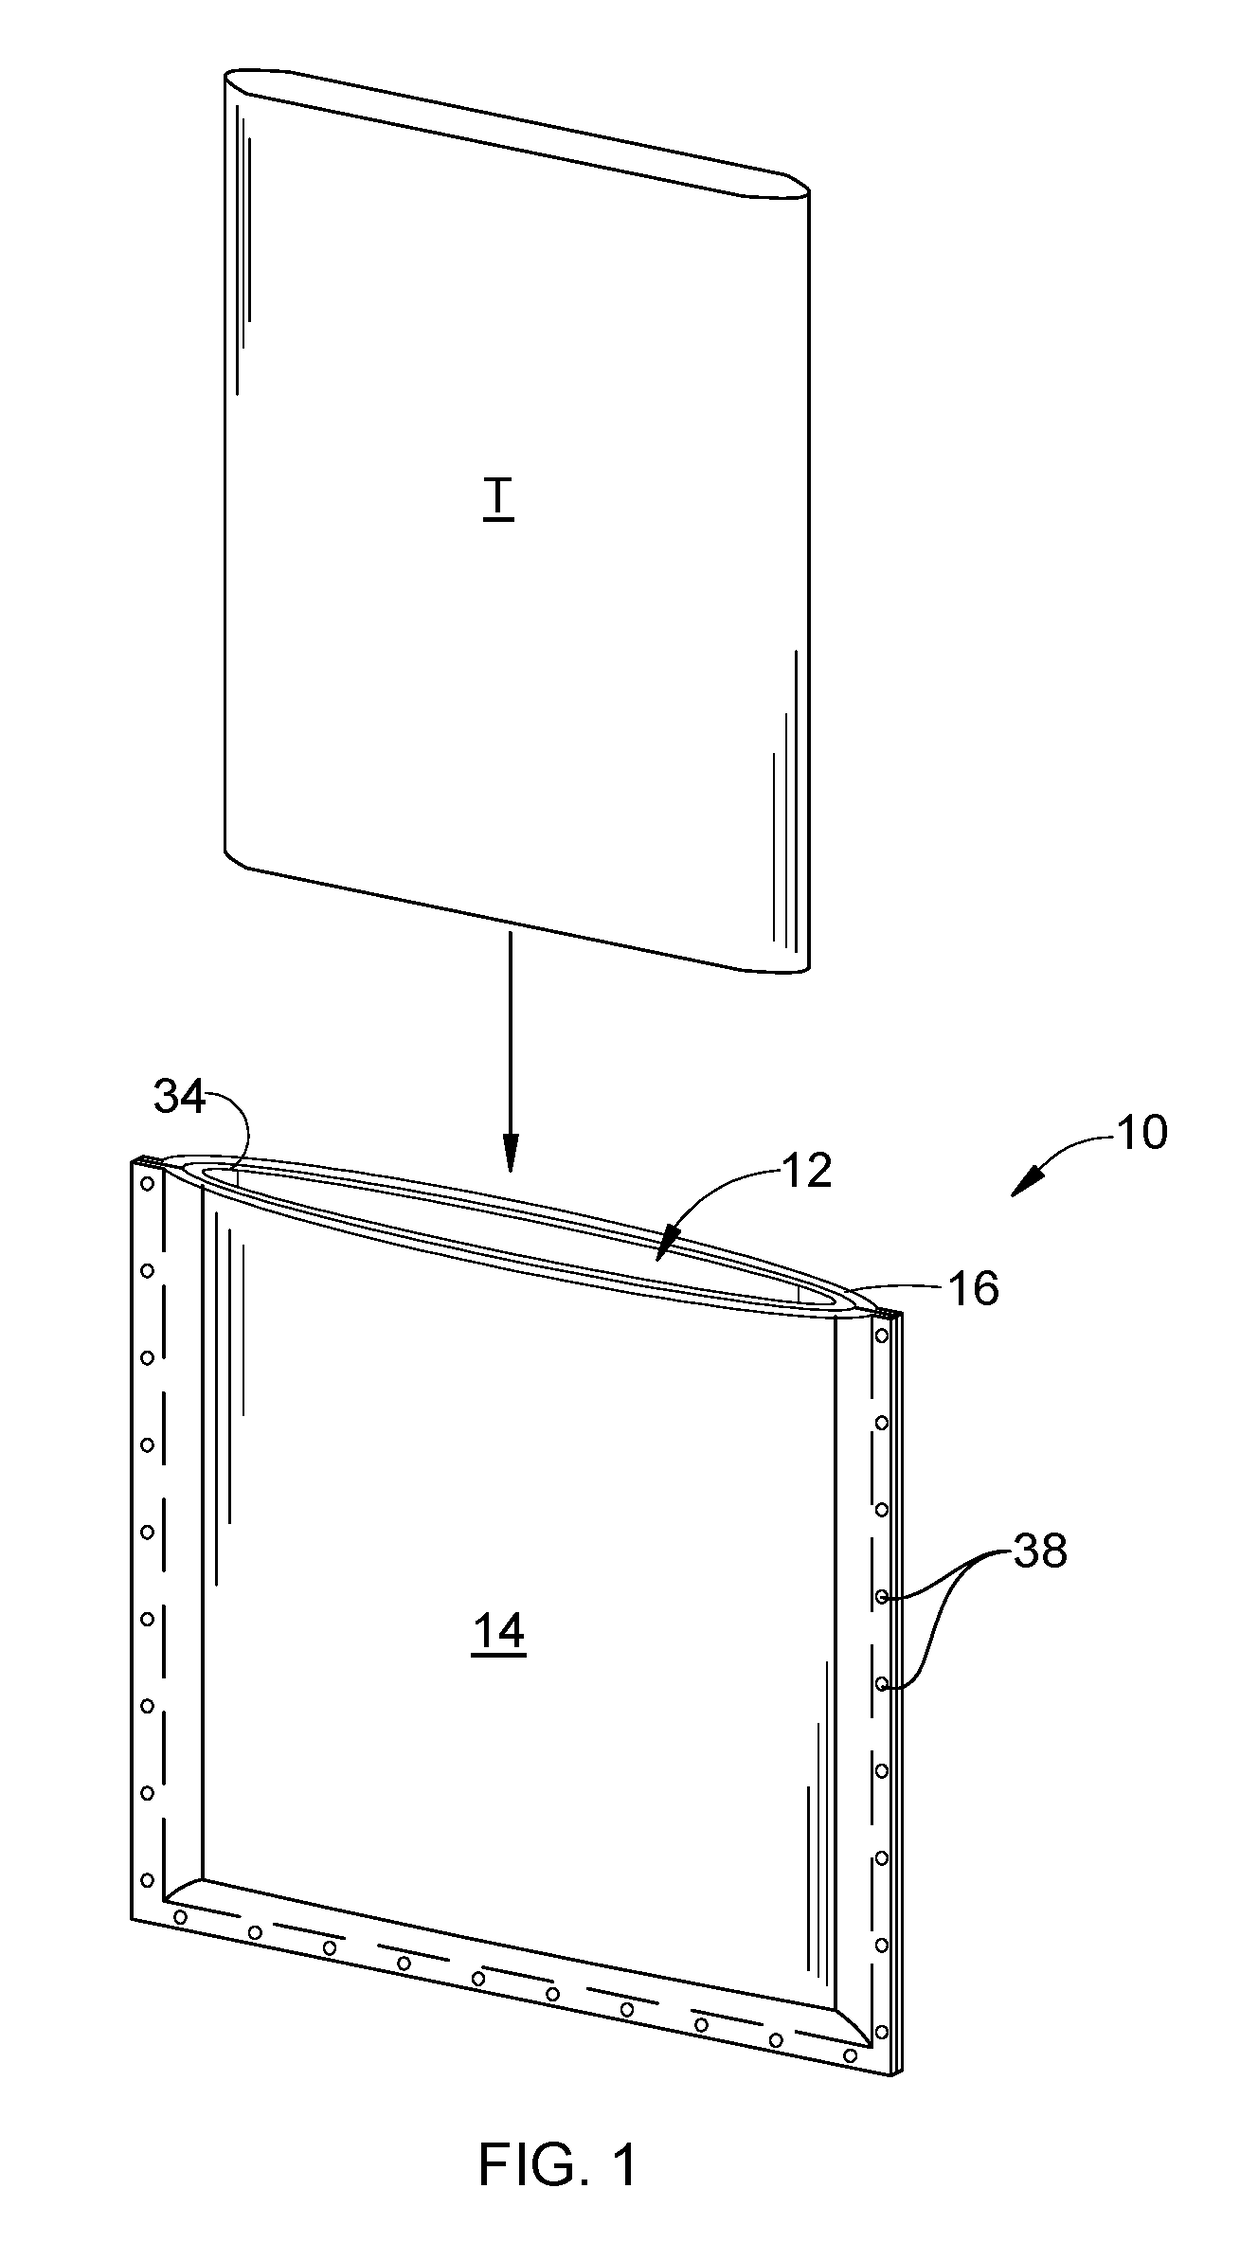 Post-surgery thermal pack holding apparatus and methods